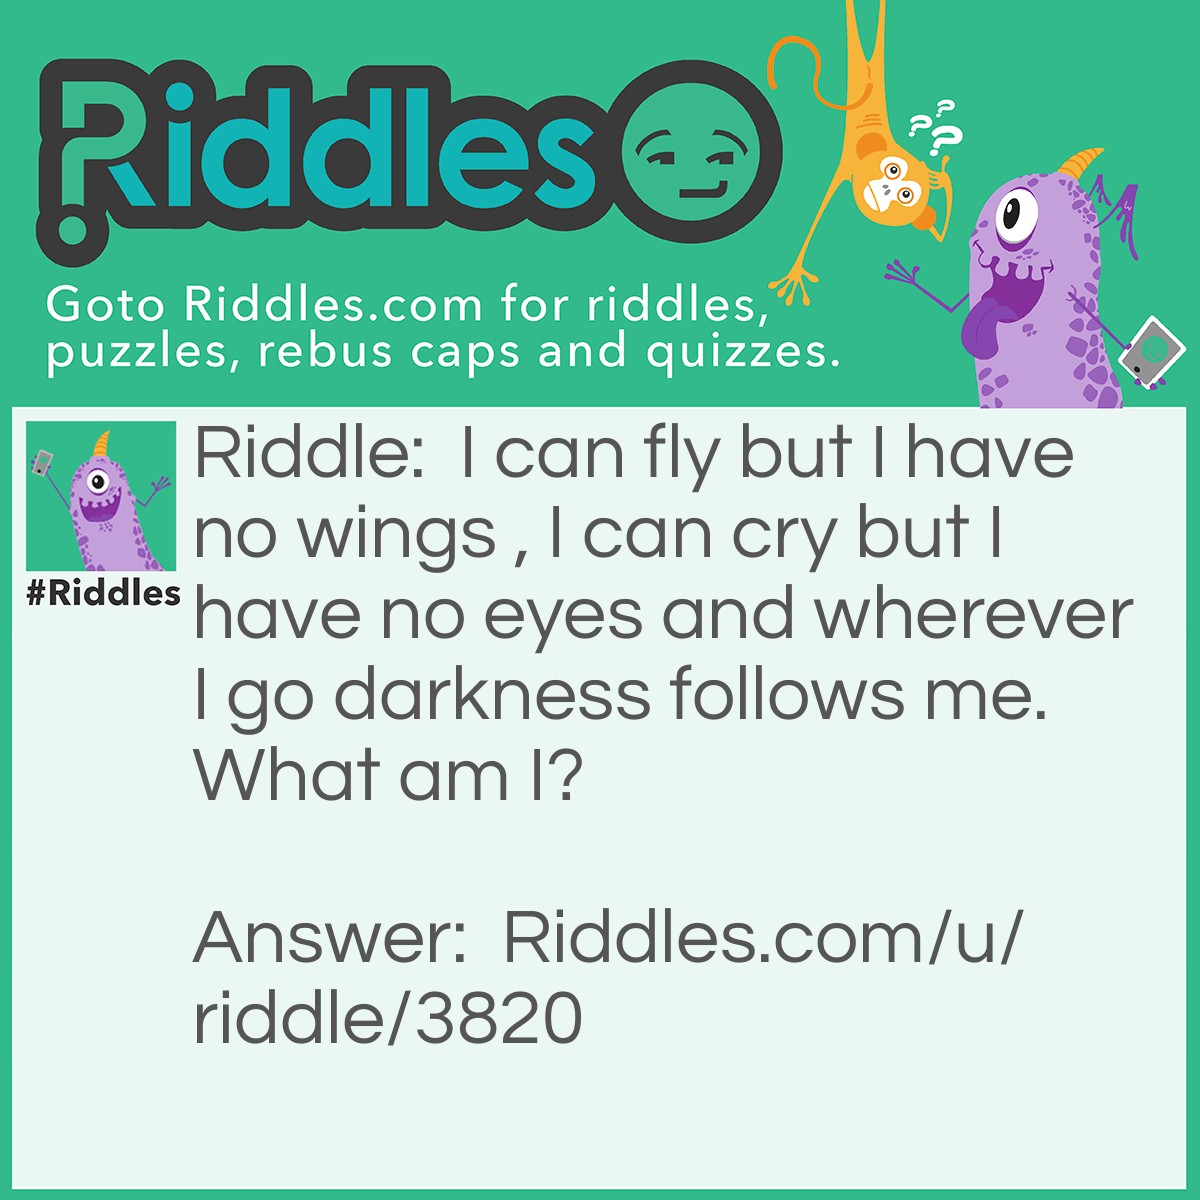 Riddle: I can fly but I have no wings , I can cry but I have no eyes and wherever I go darkness follows me. What am I? Answer: Clouds.